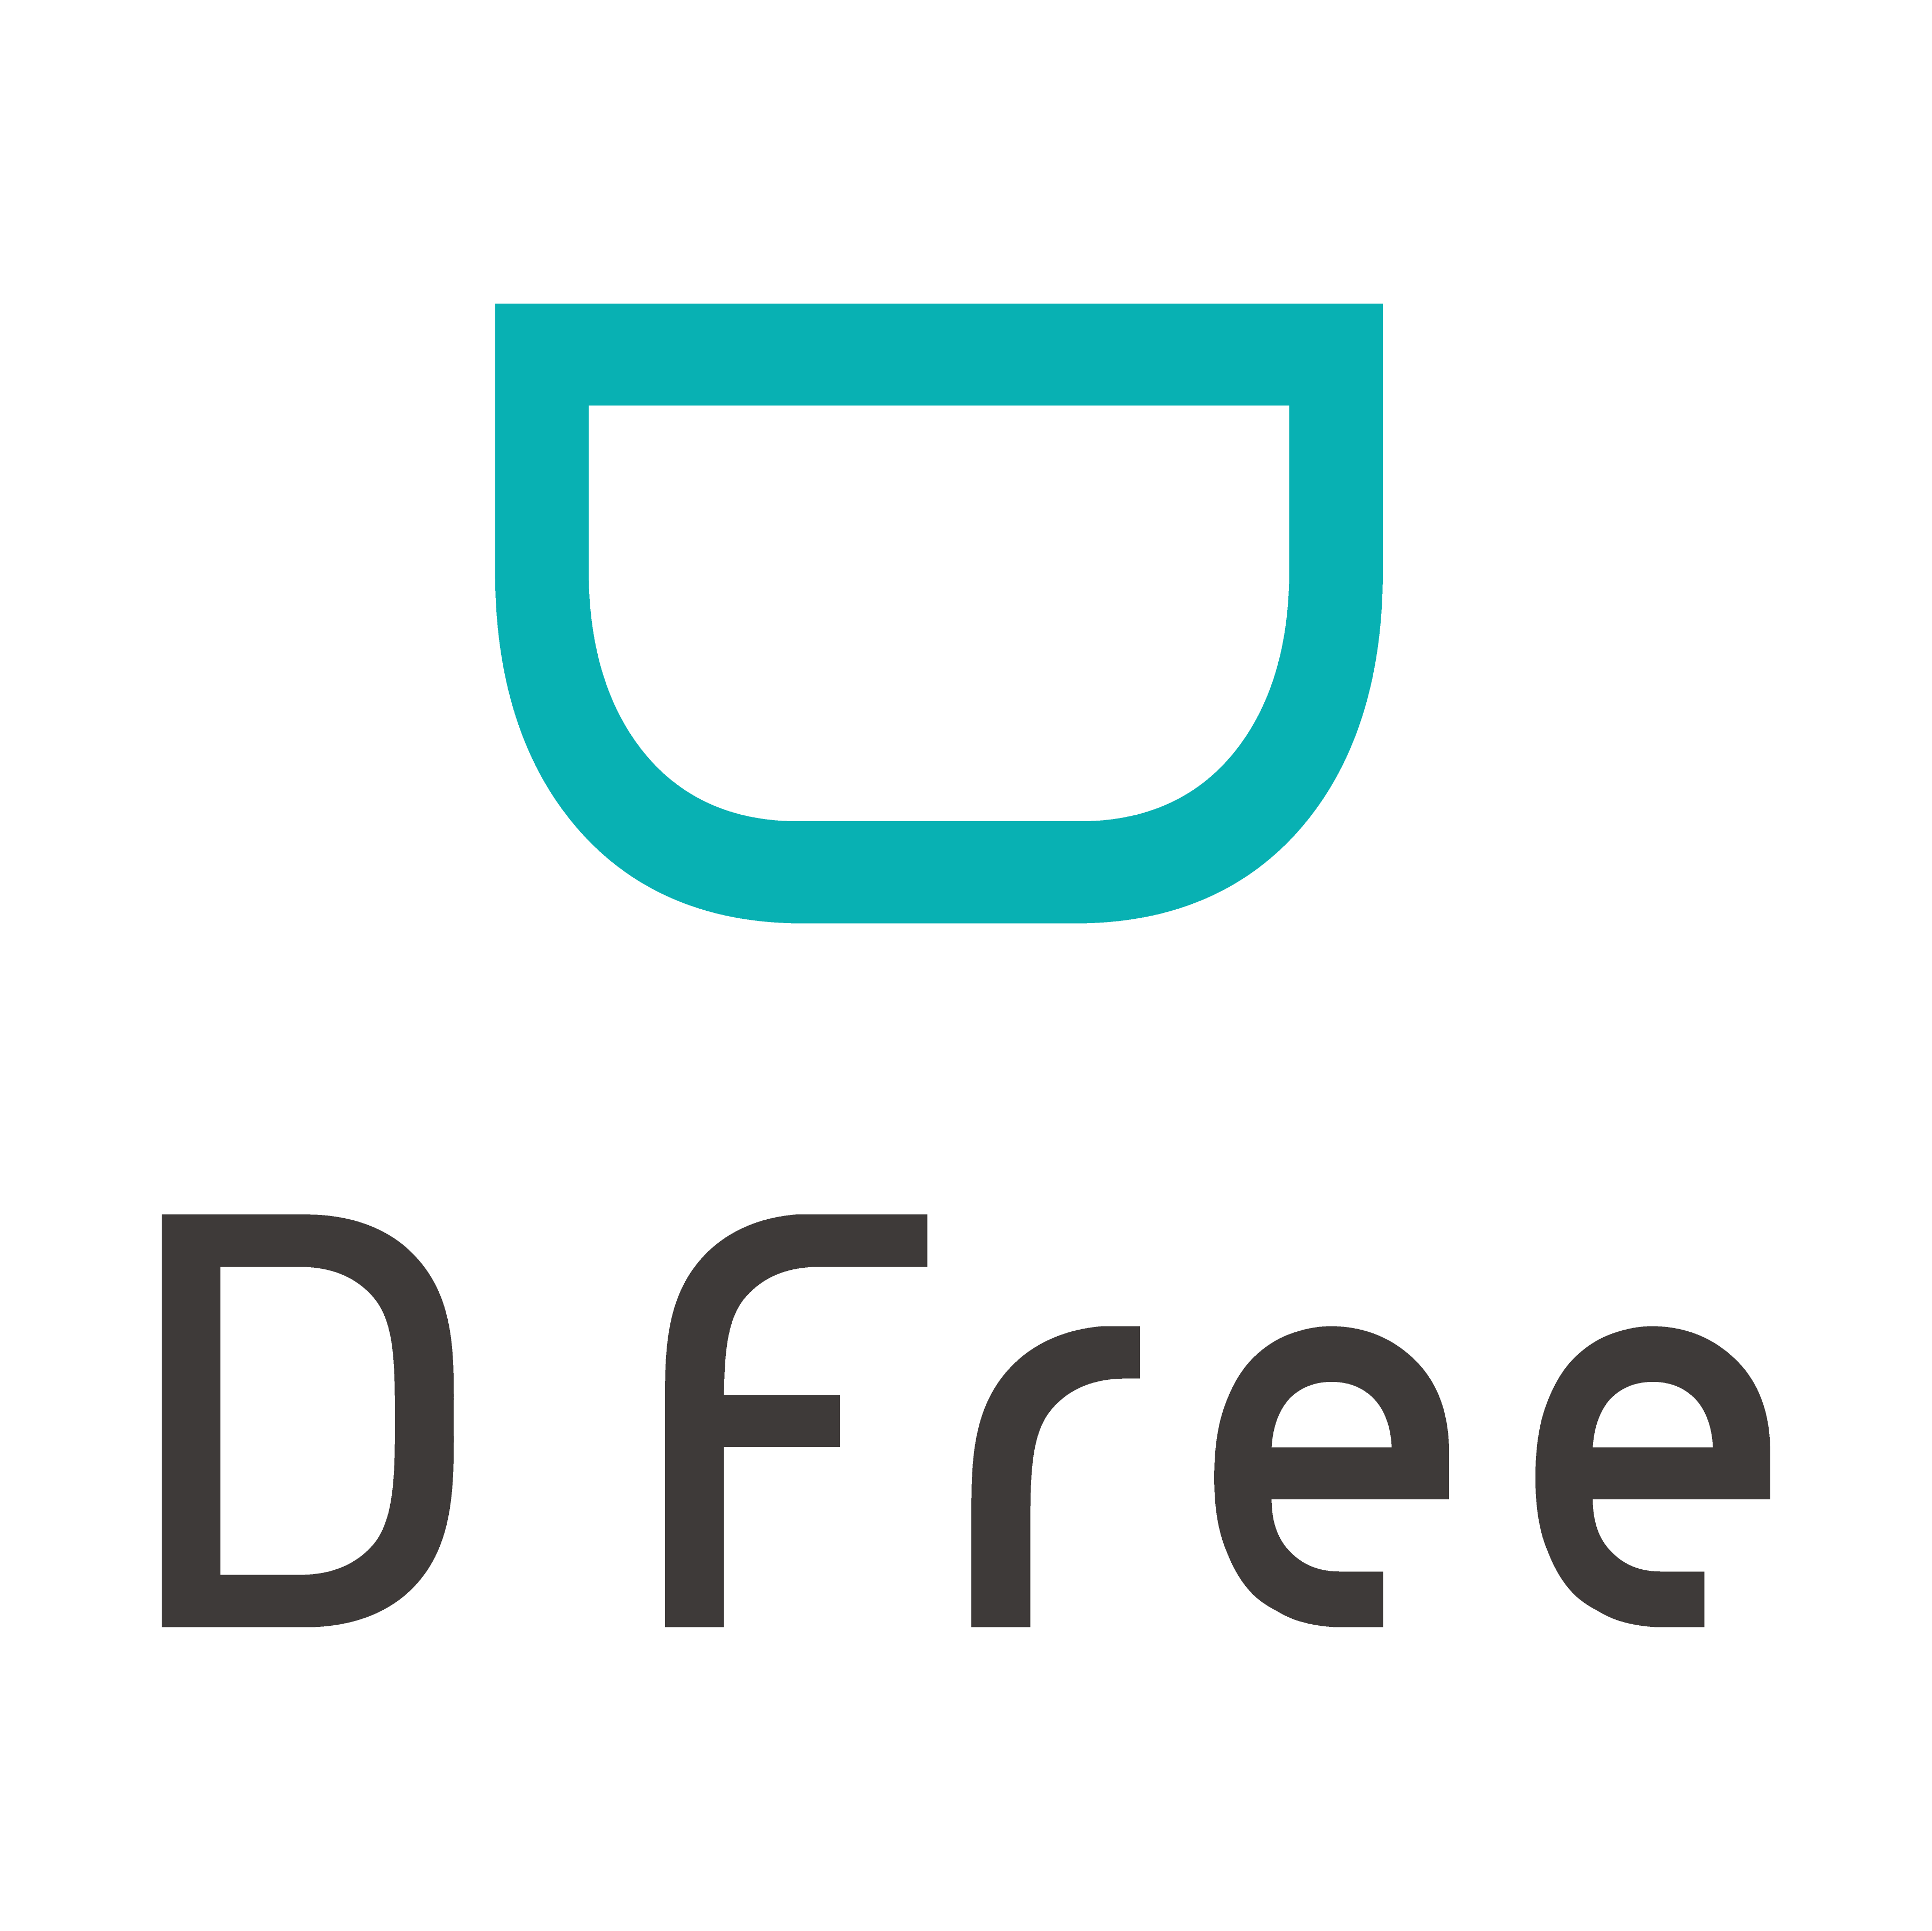 DFree is the first wearable device for incontinence that notifies the user when it’s time to go to the bathroom.